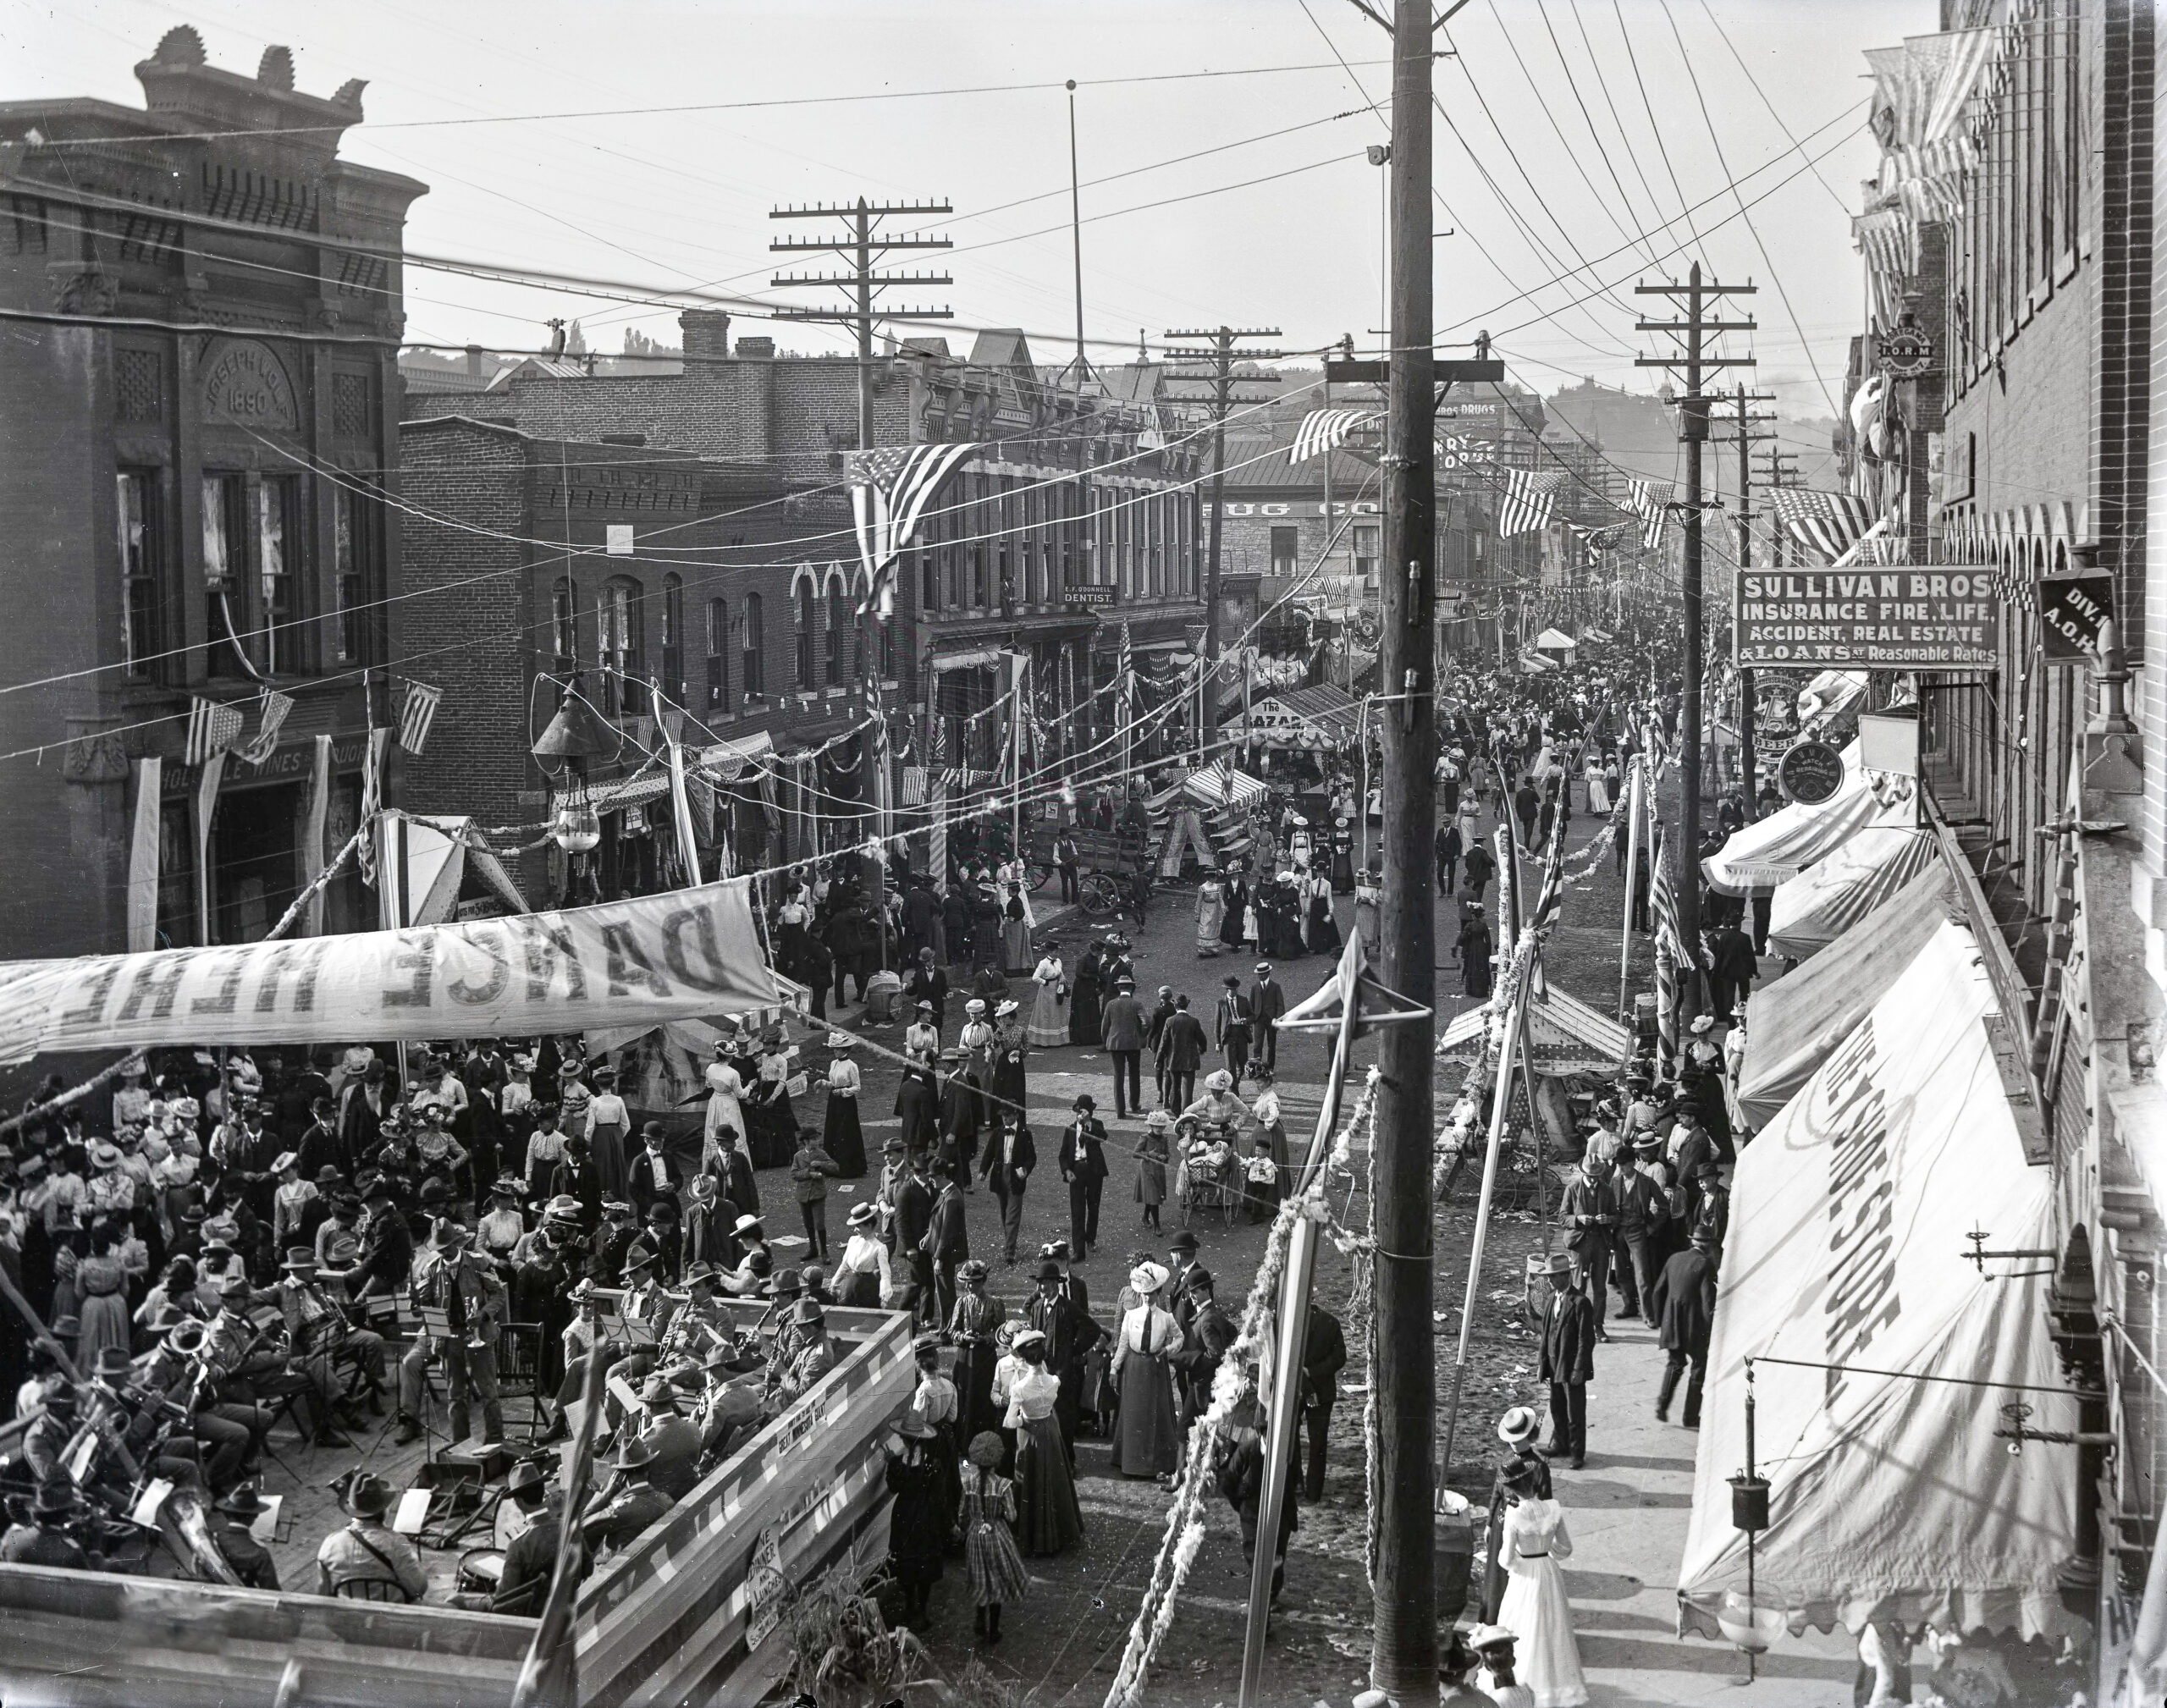 The original photograph of the 1901 Stillwater Street Fair on Main Street which inspired the 2023 event.